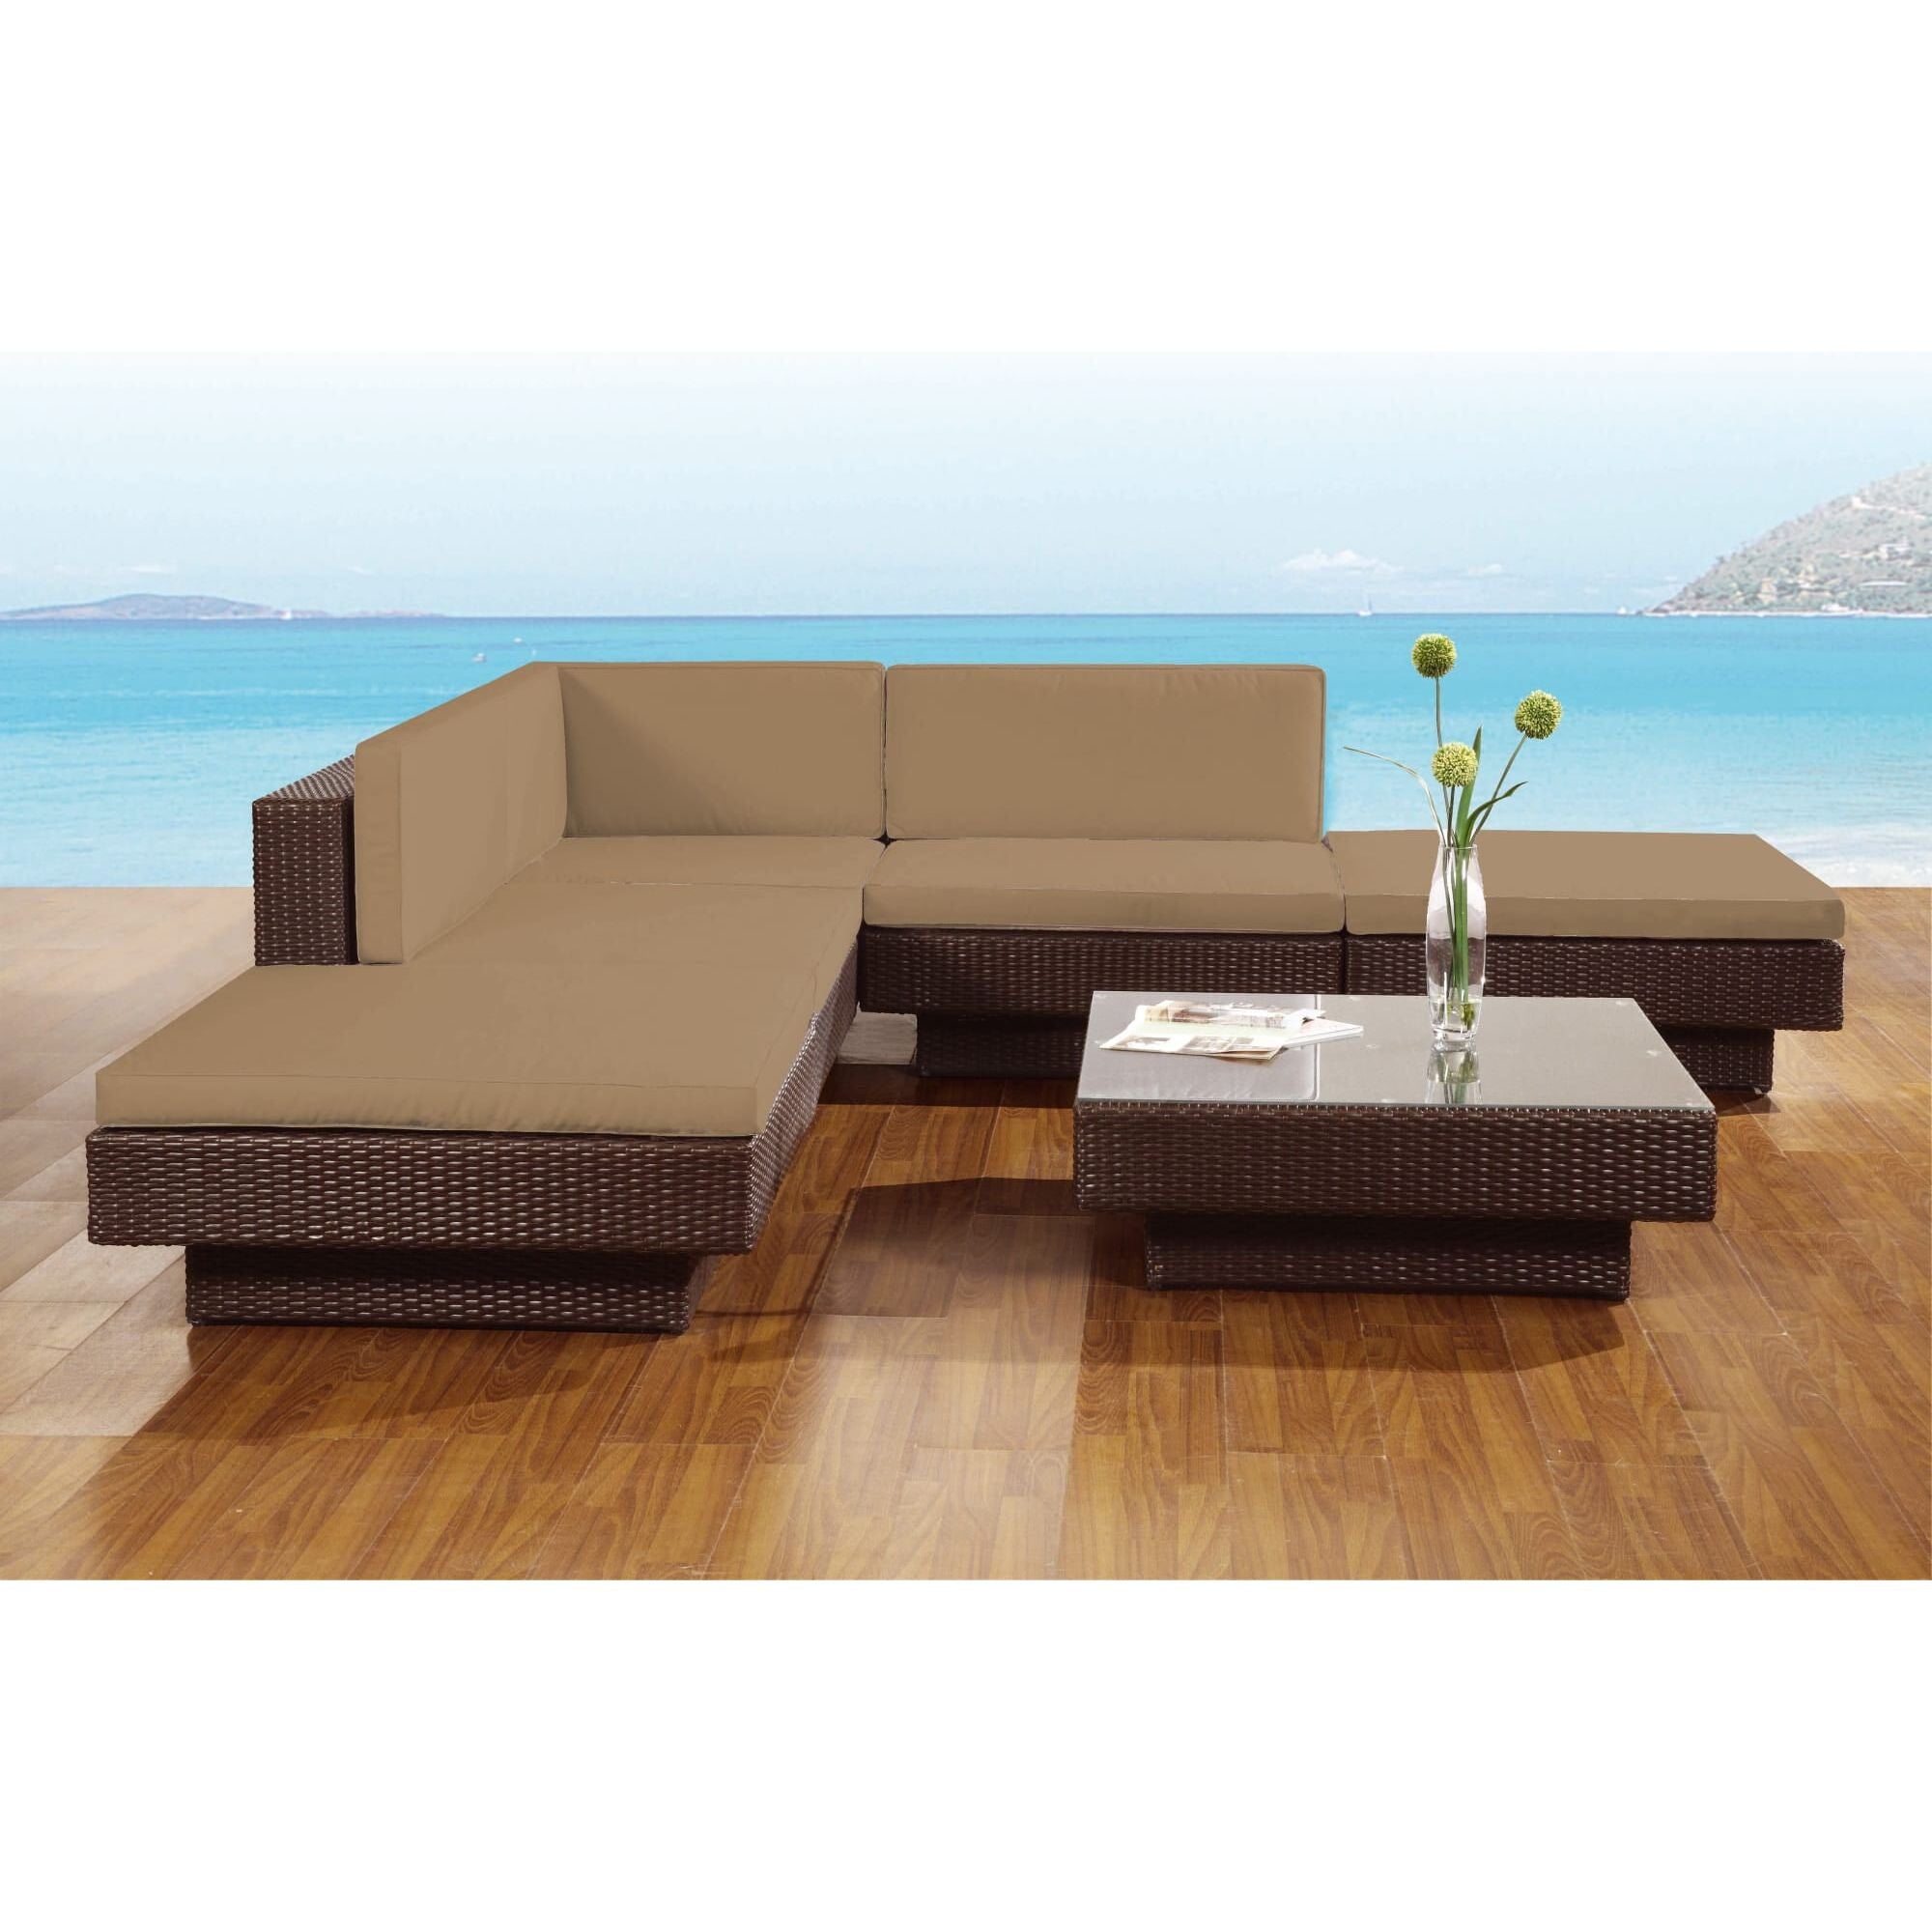 Garbar Colin coffee table indoors, outdoors 90x90 brown